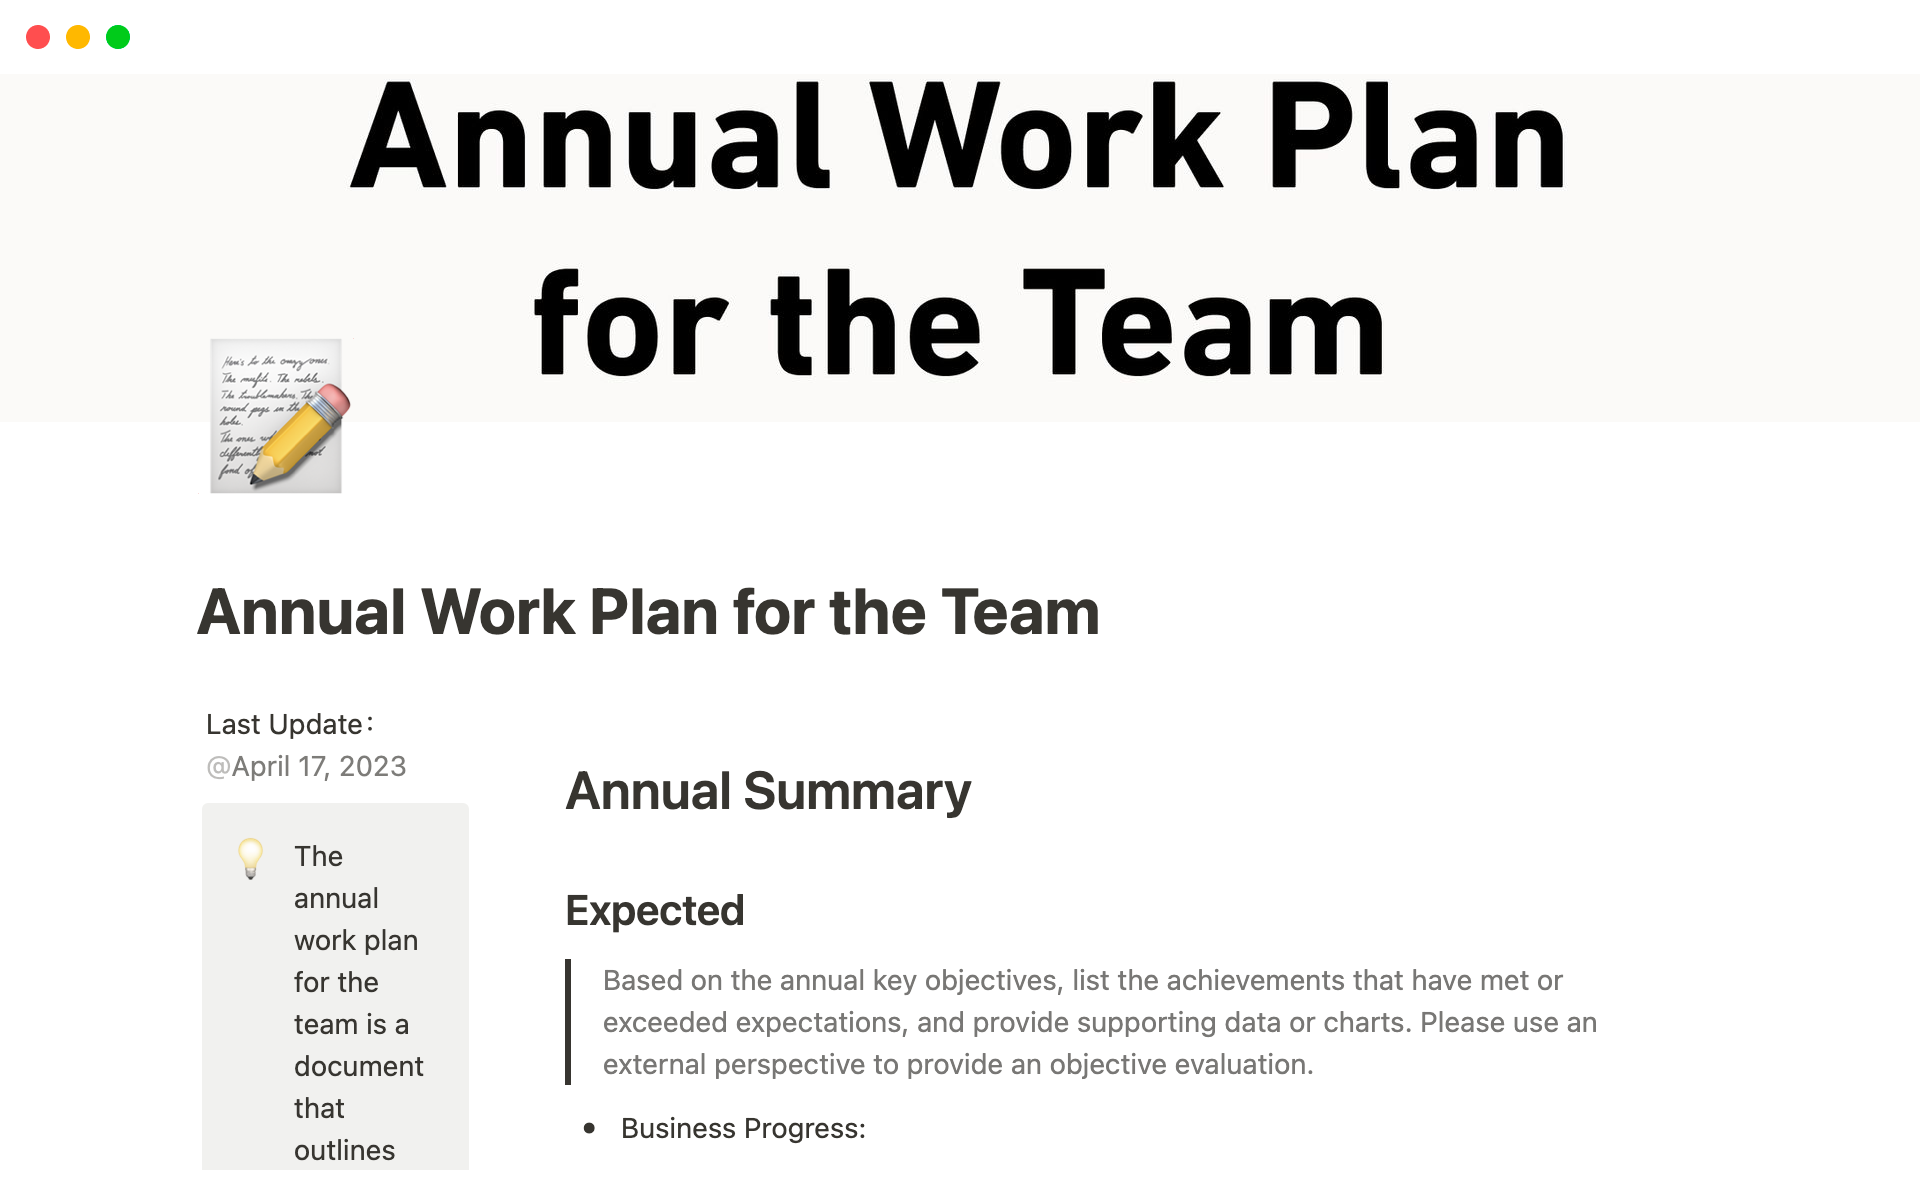 The annual work plan for the team is a document that outlines the team's work goals, plans, tasks, and timetable for the year.